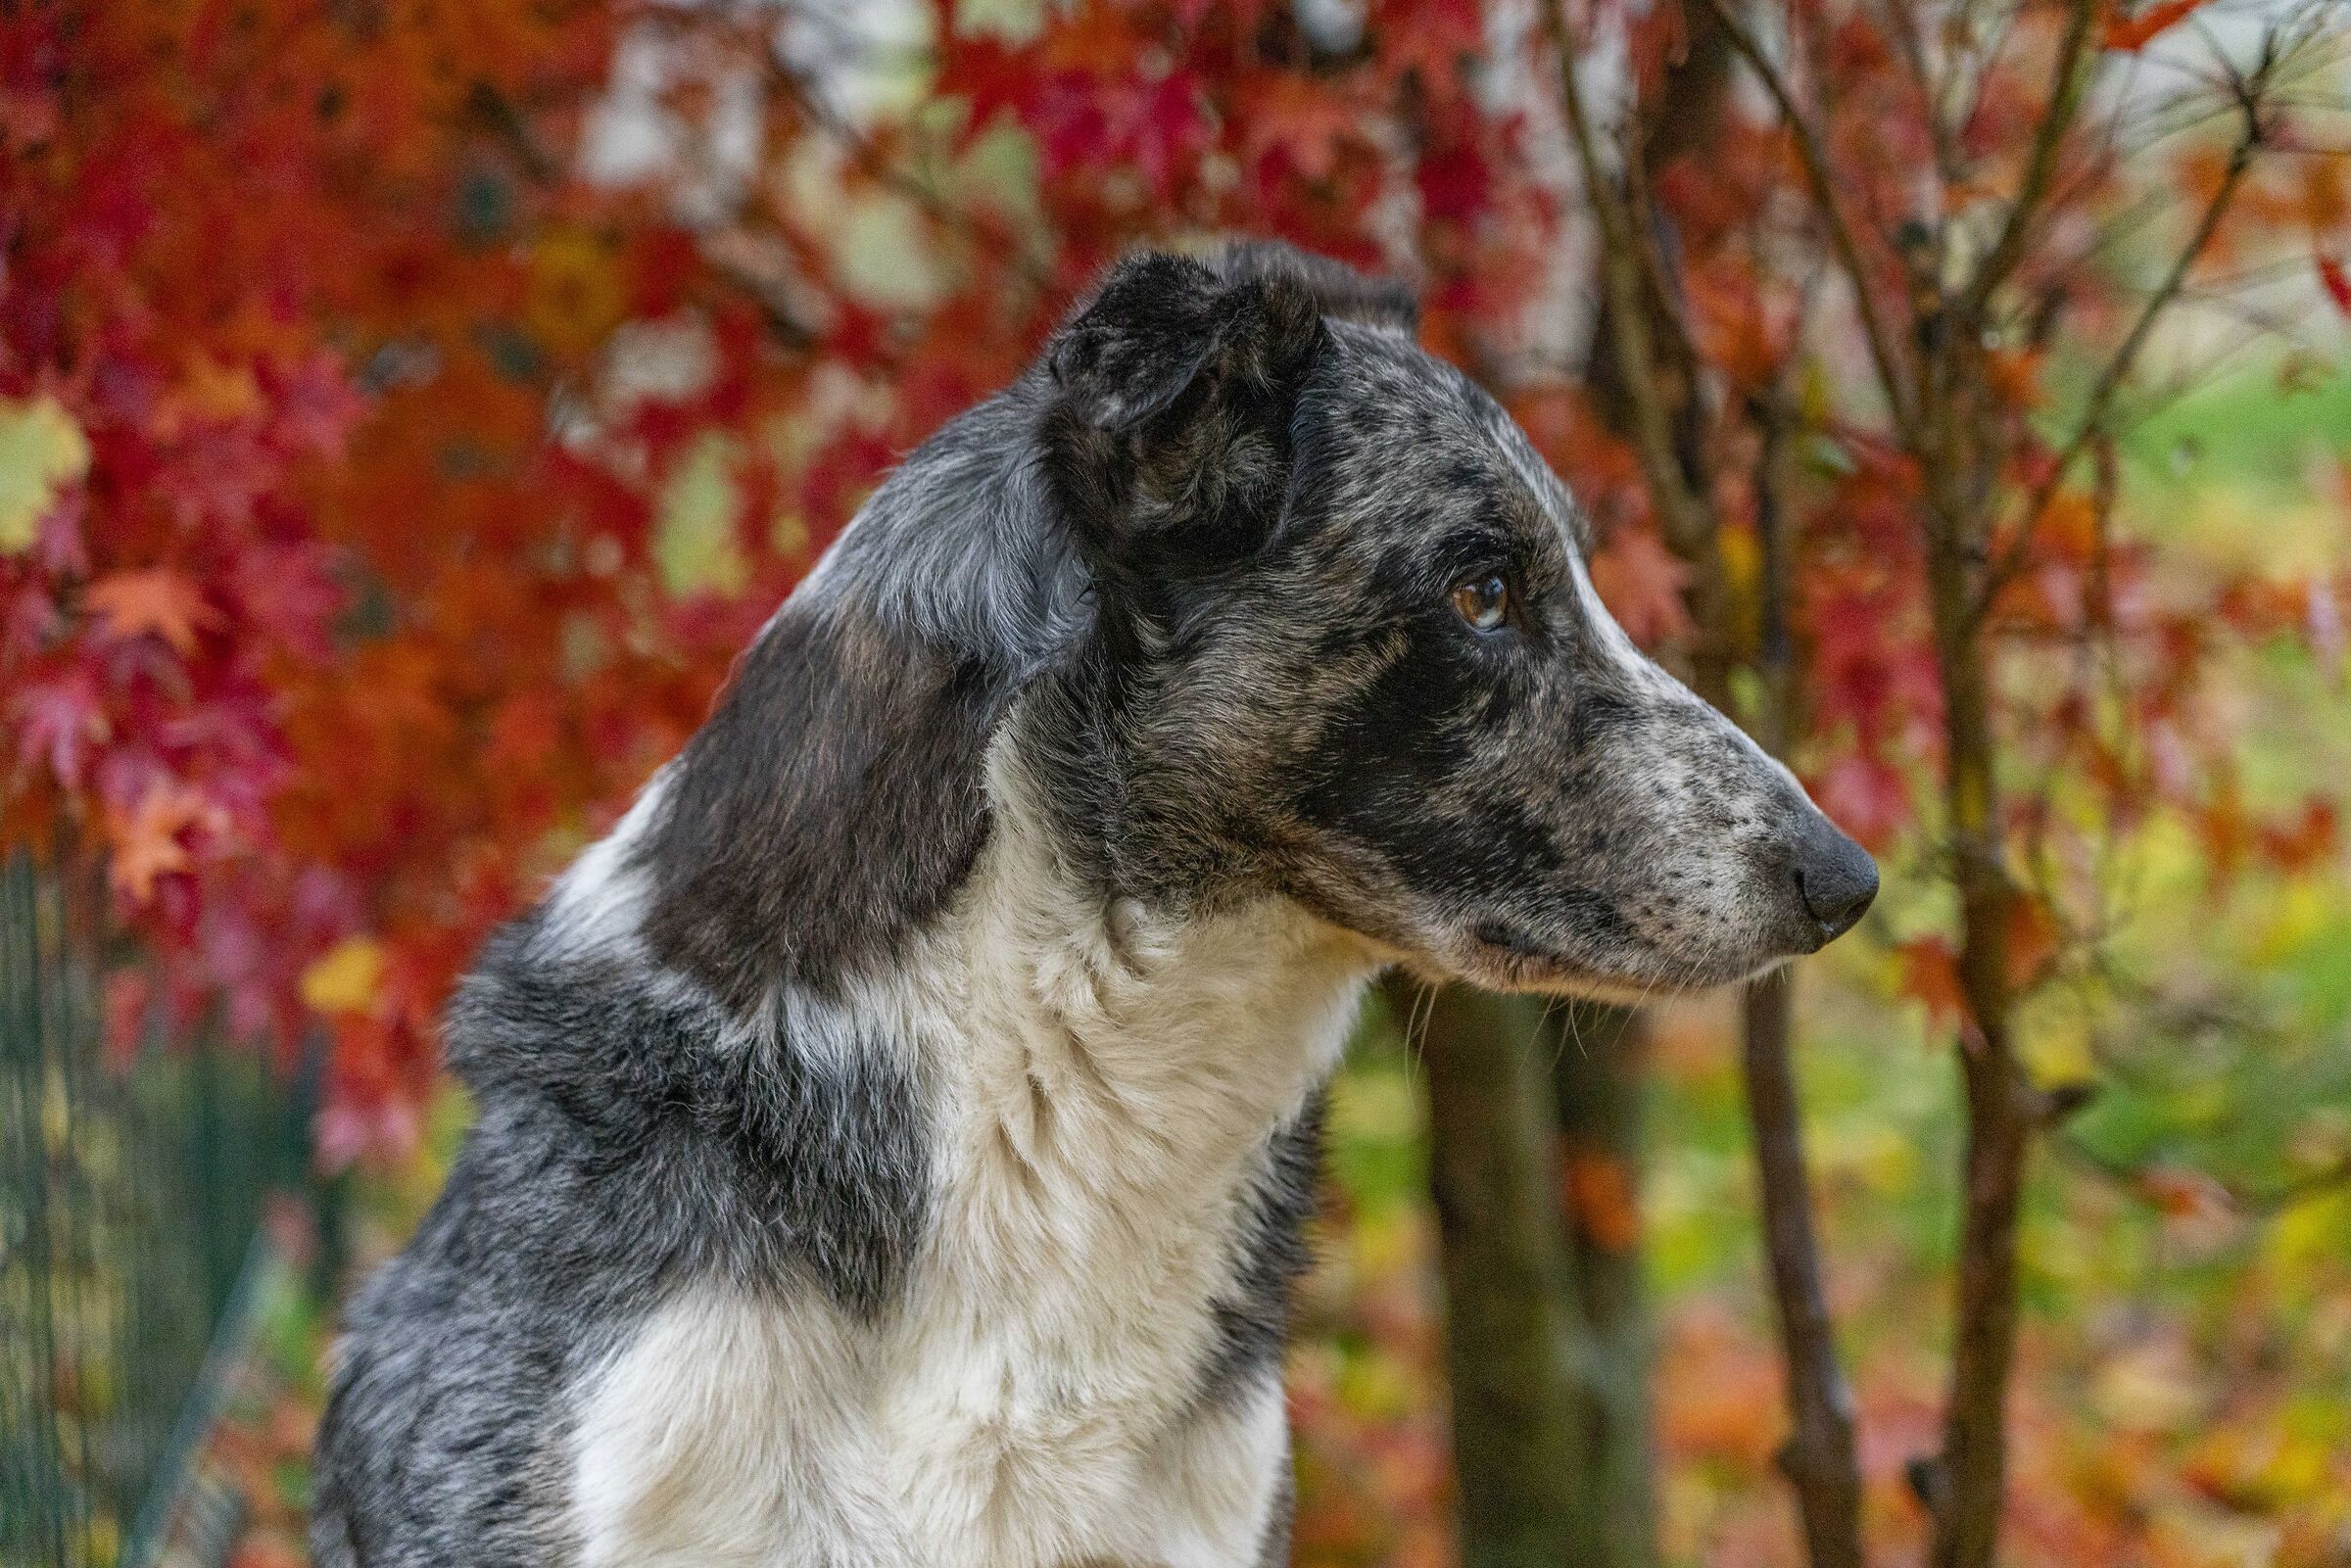 the silver border collie dog among the leaves in Novemb...